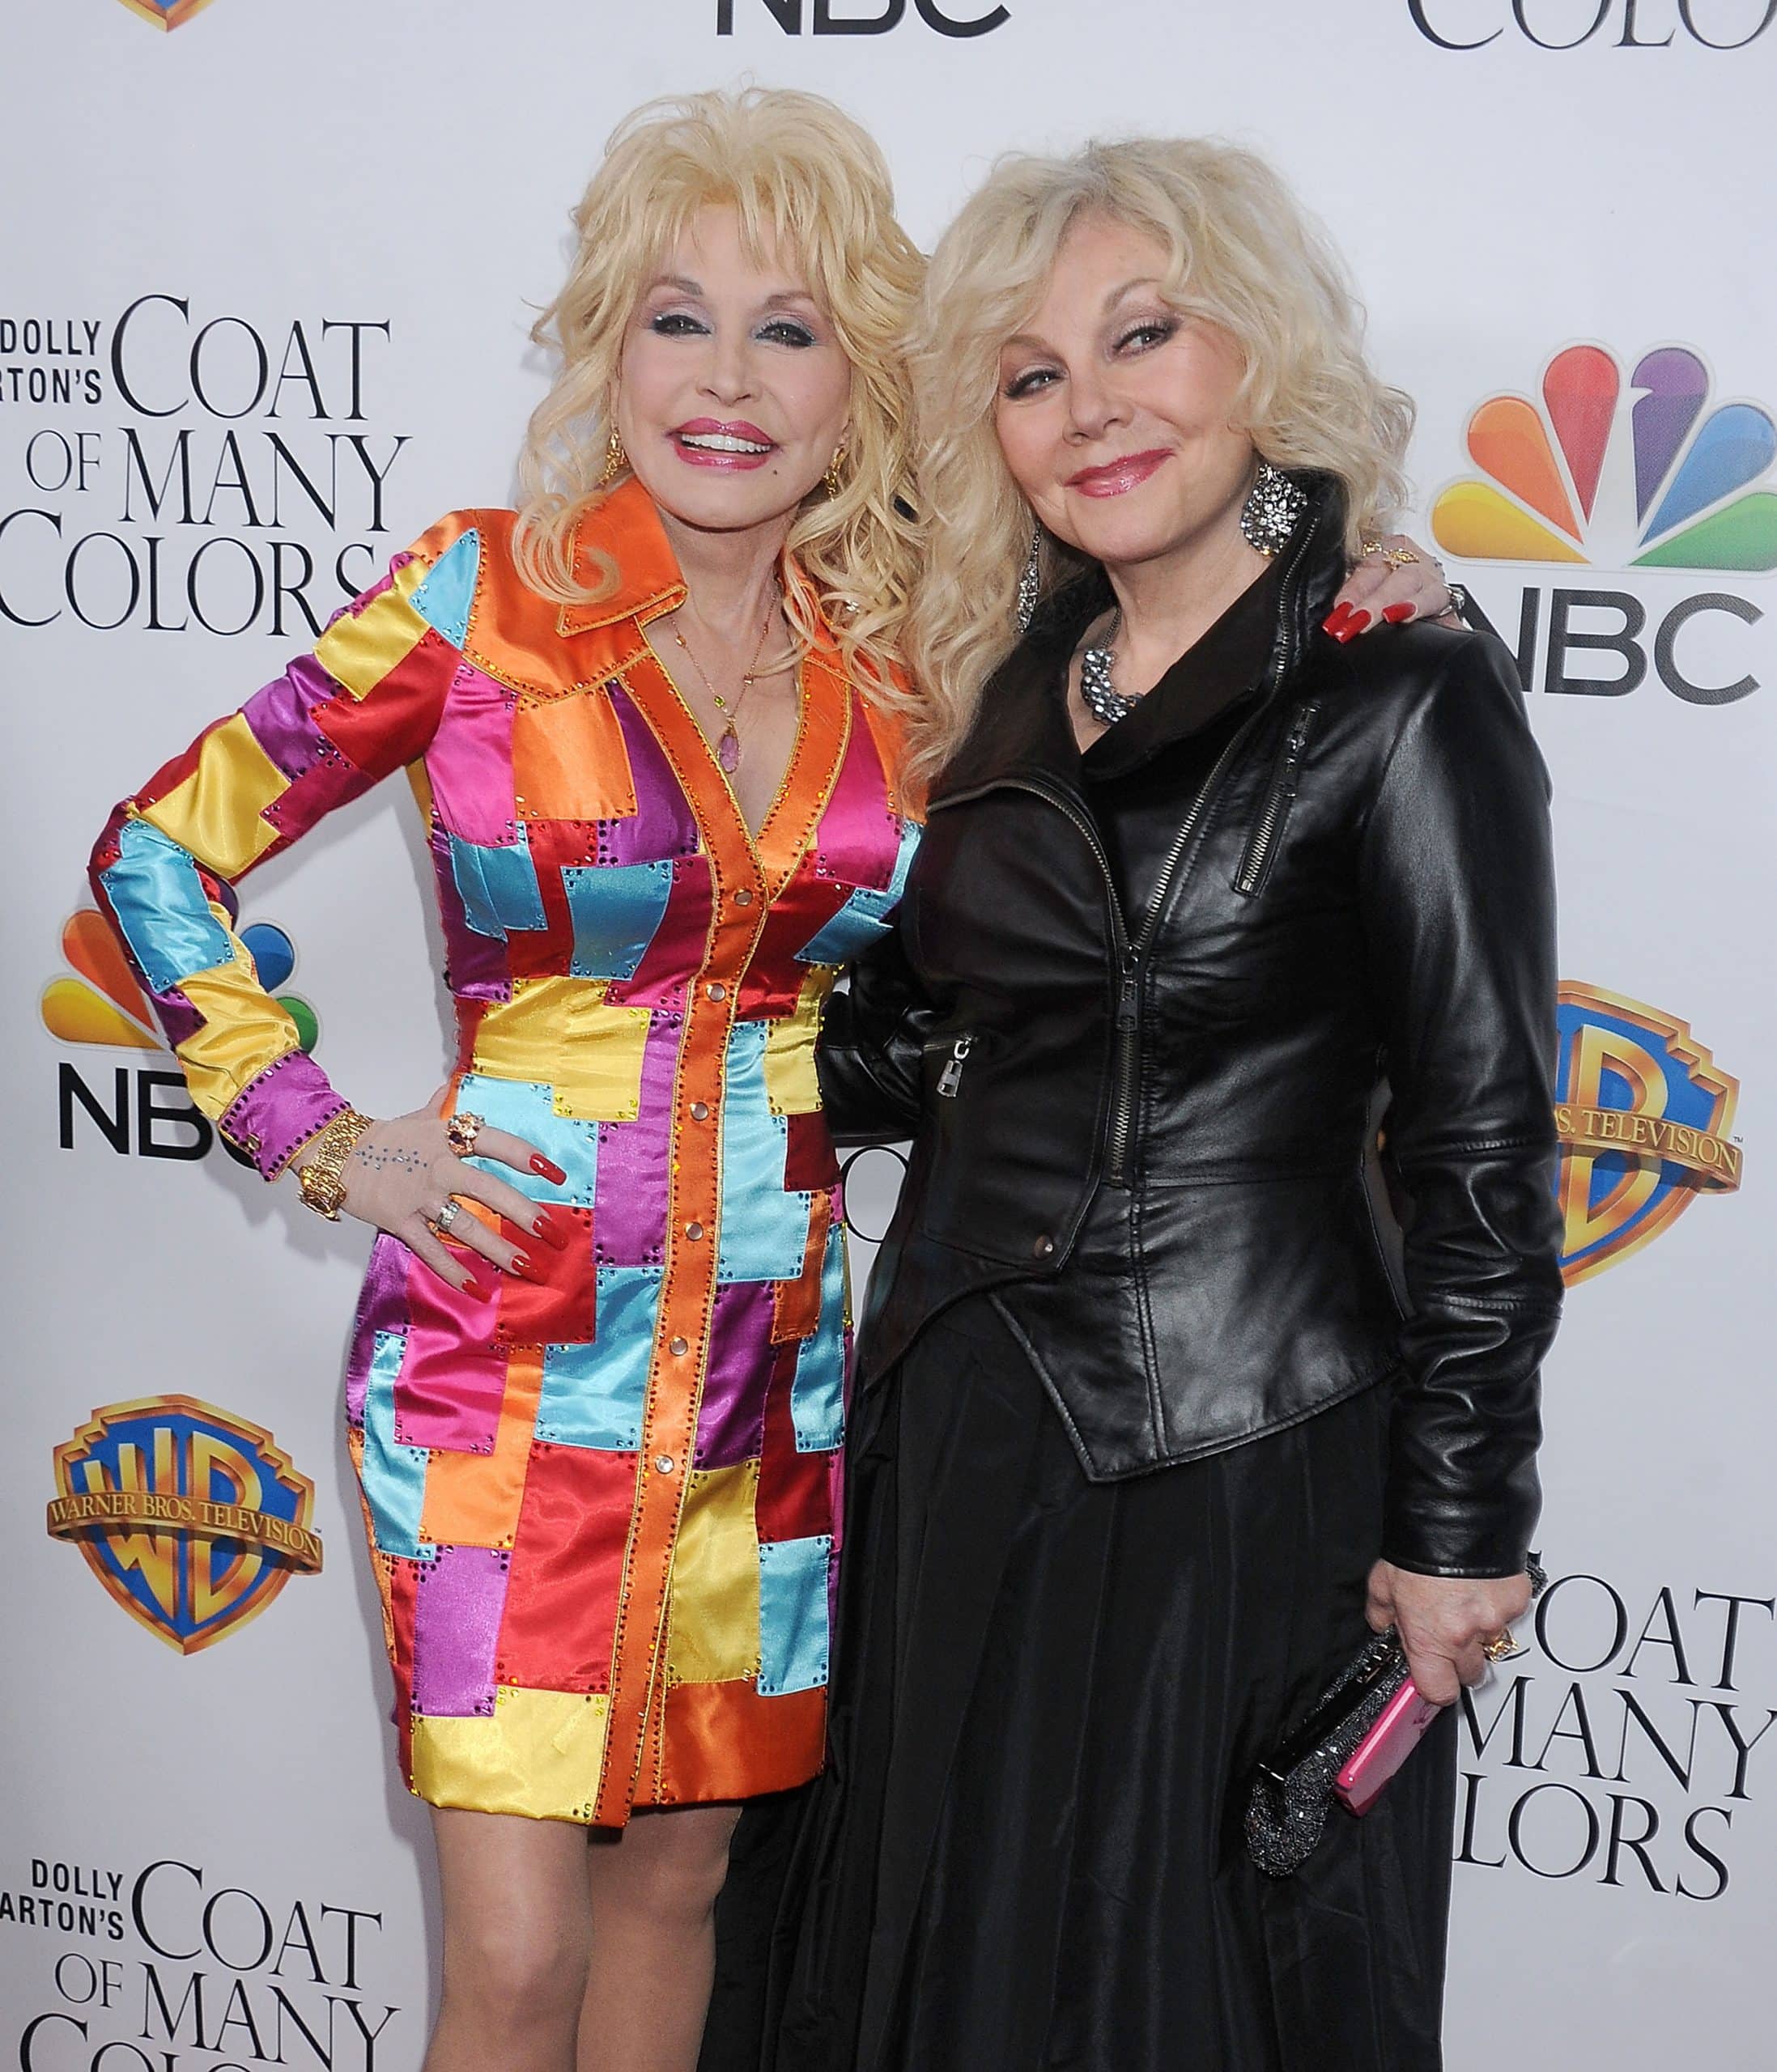 Dolly Parton with her little sister Stella